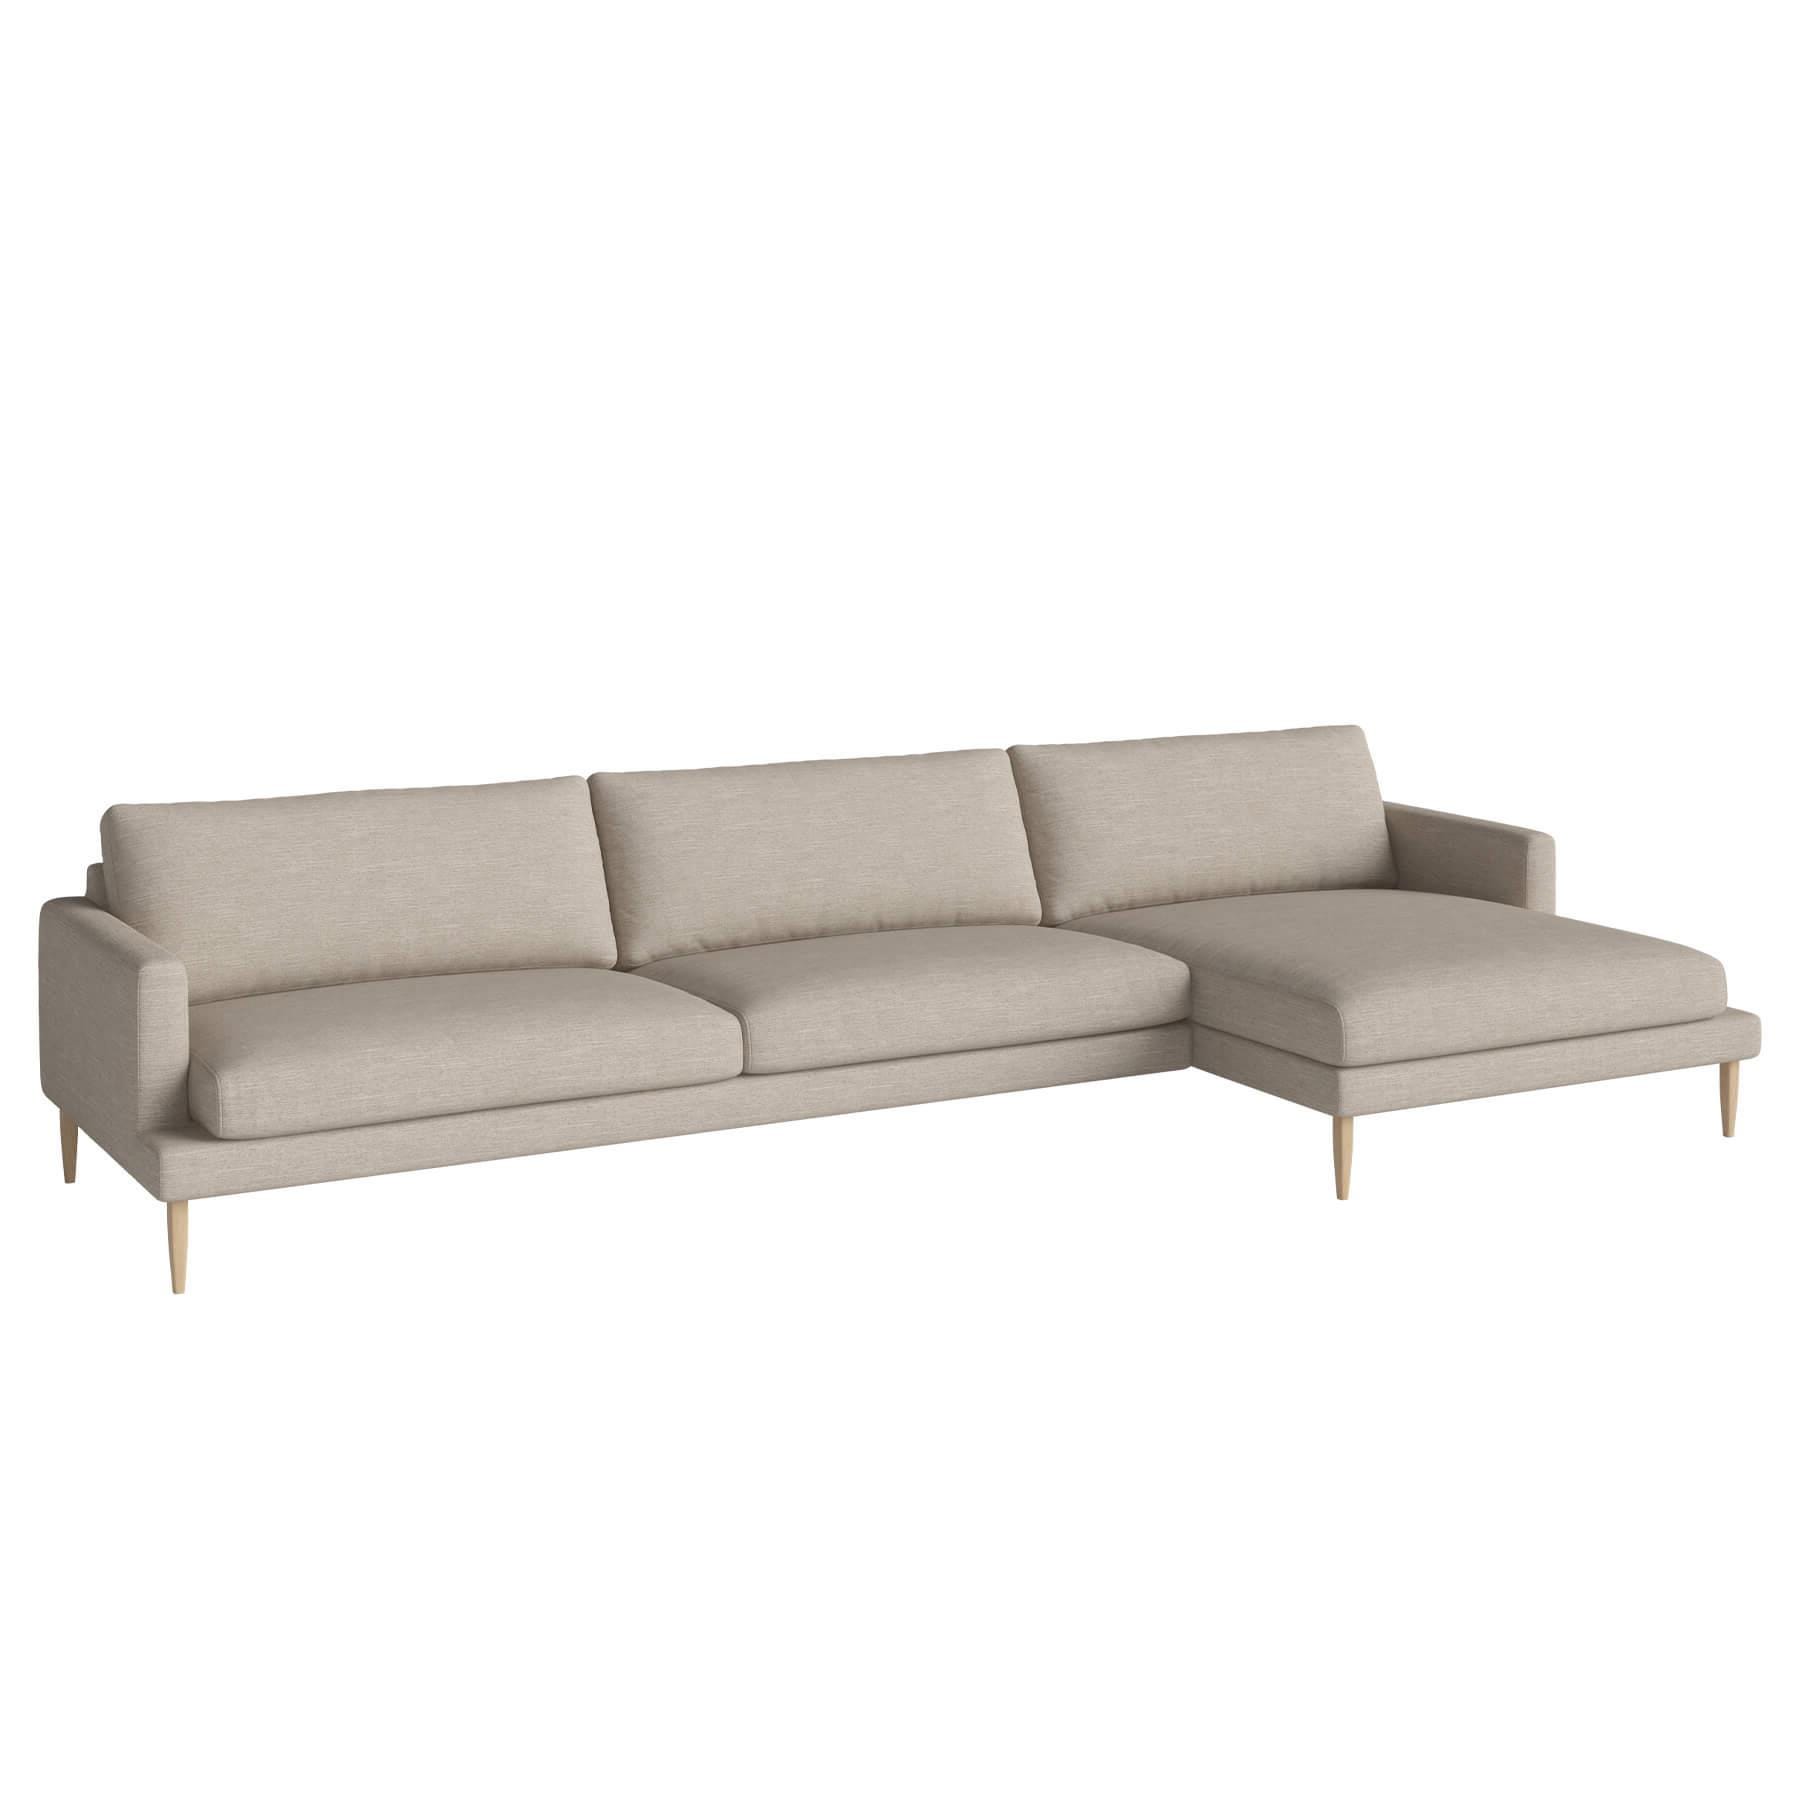 Bolia Veneda Sofa 45 Seater Sofa With Chaise Longue White Oiled Oak Baize Sand Right Brown Designer Furniture From Holloways Of Ludlow